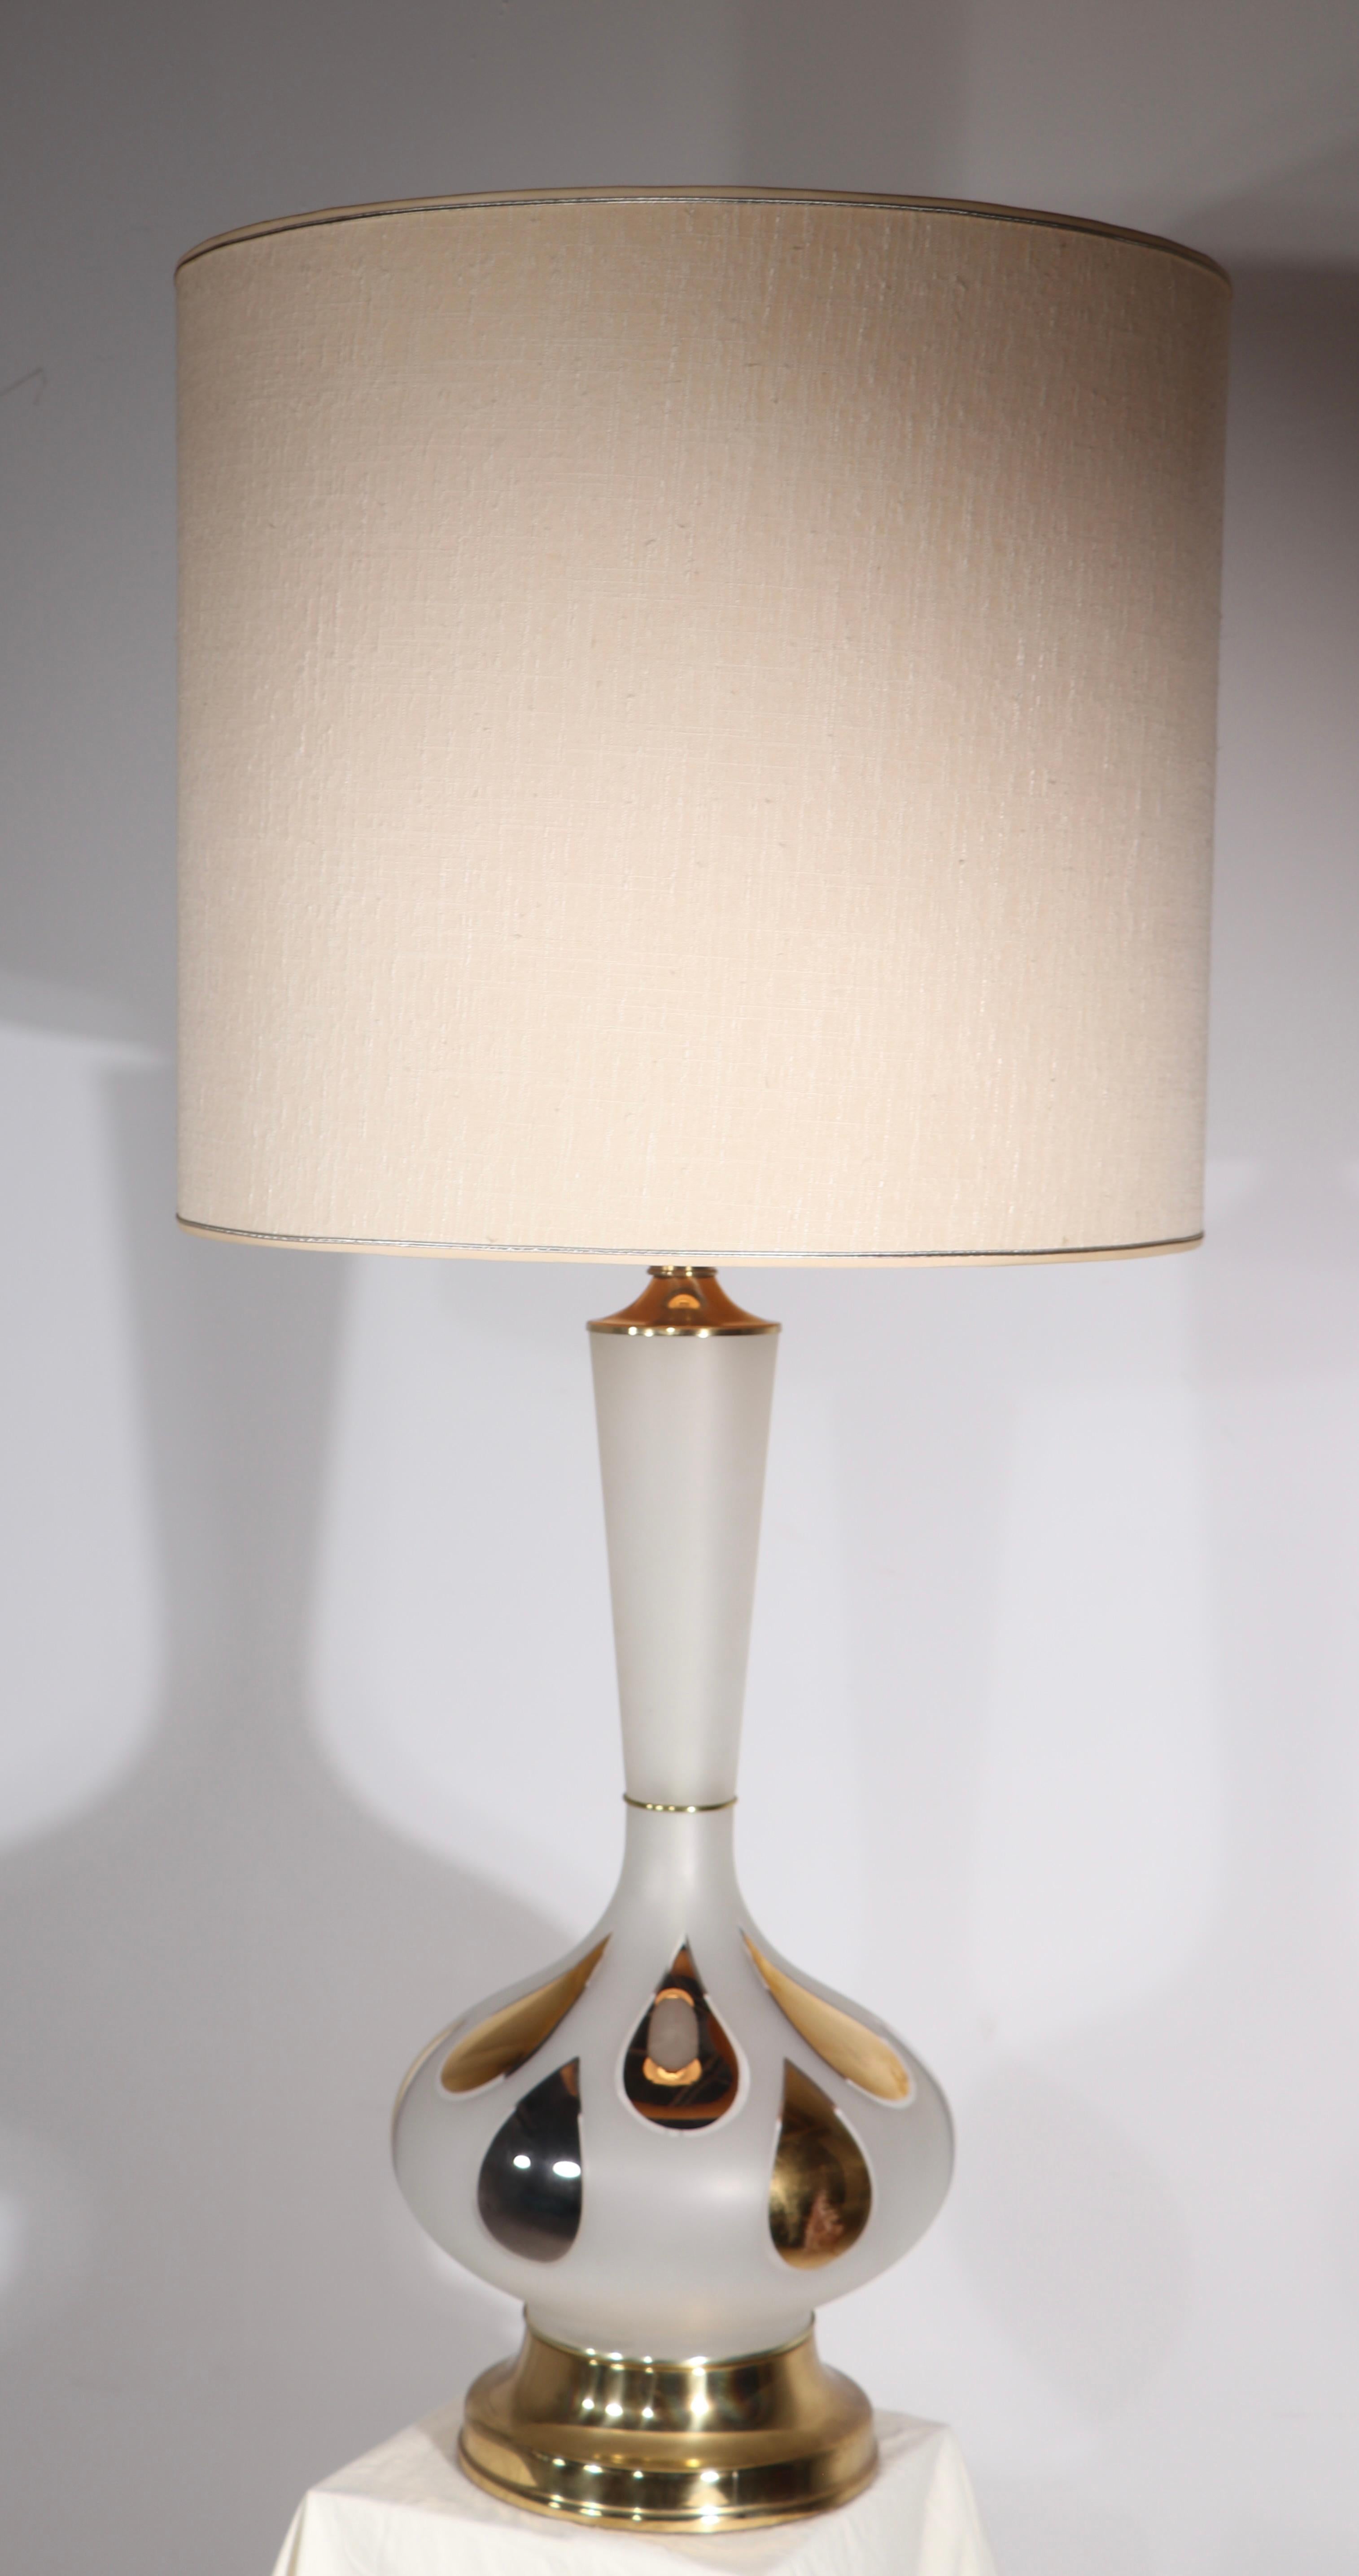 20th Century Large Glass Table Lamp with Gold Leaf Drip Motif circa 1950-1960's For Sale